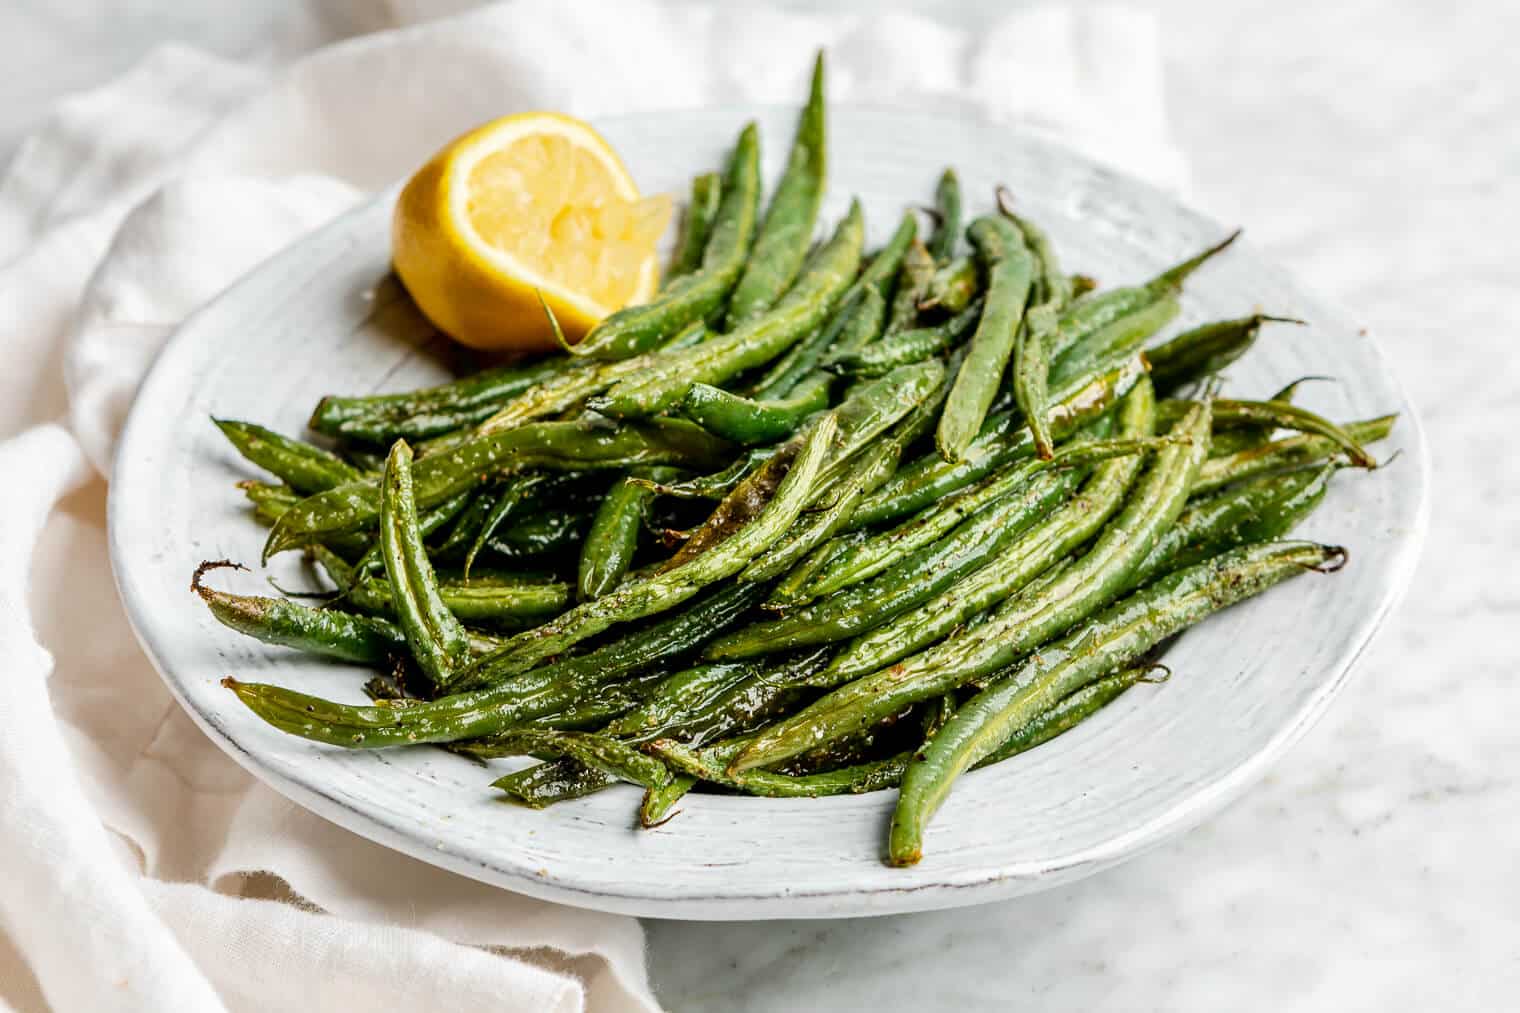 A white bowl filled with oven roasted green beans and garnished with a half squeezed lemon. There is a white linen draped to the left side.